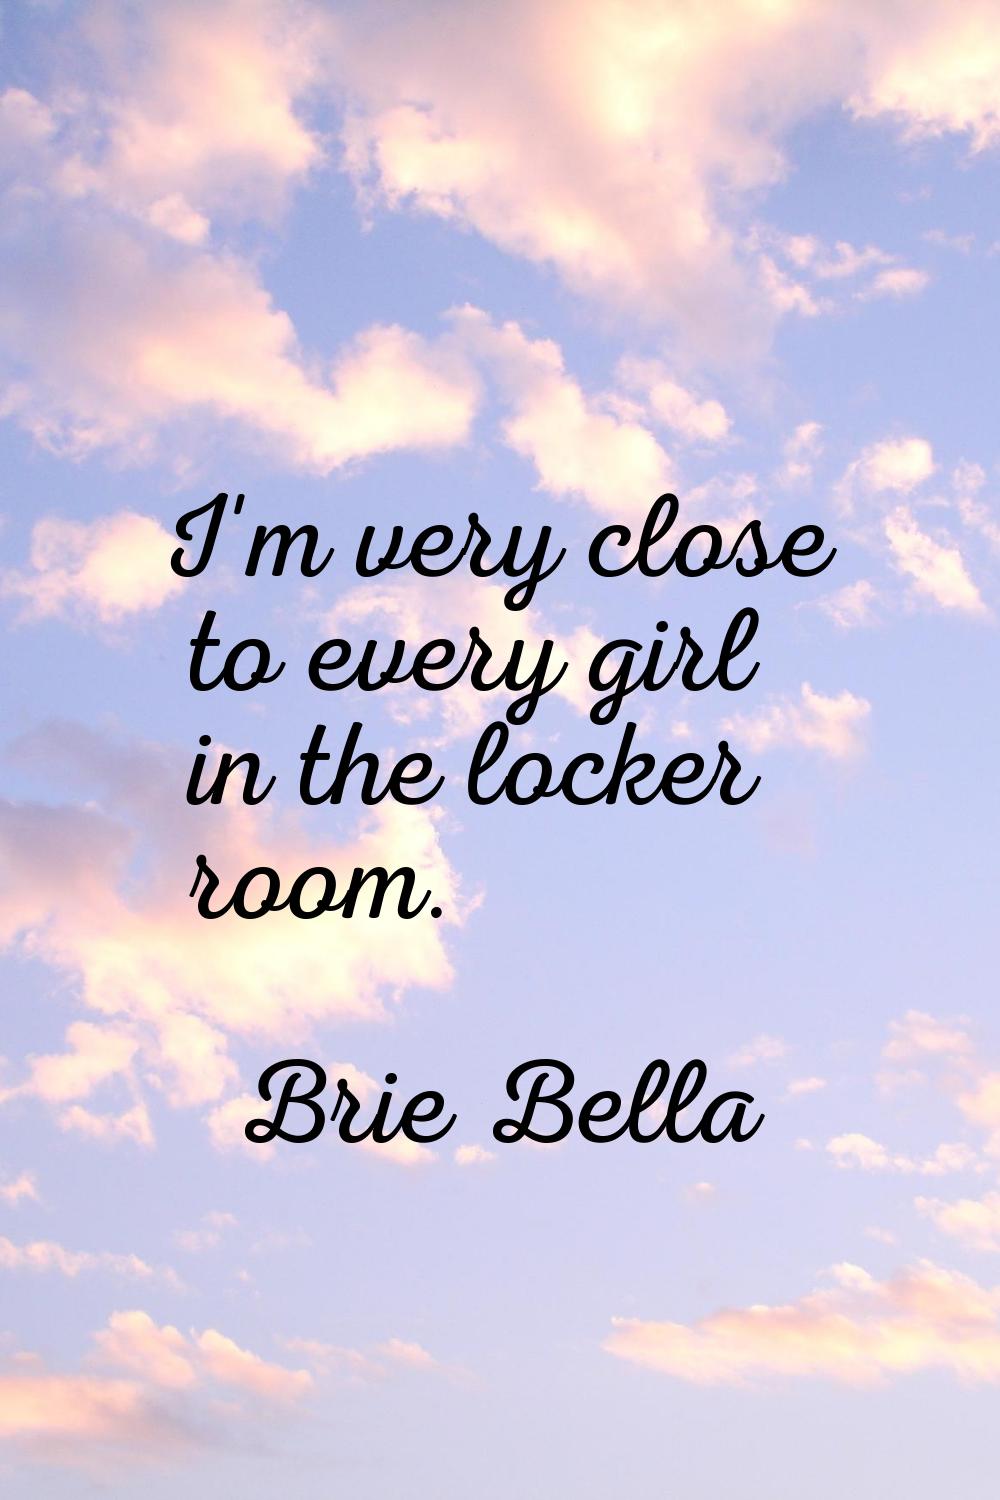 I'm very close to every girl in the locker room.